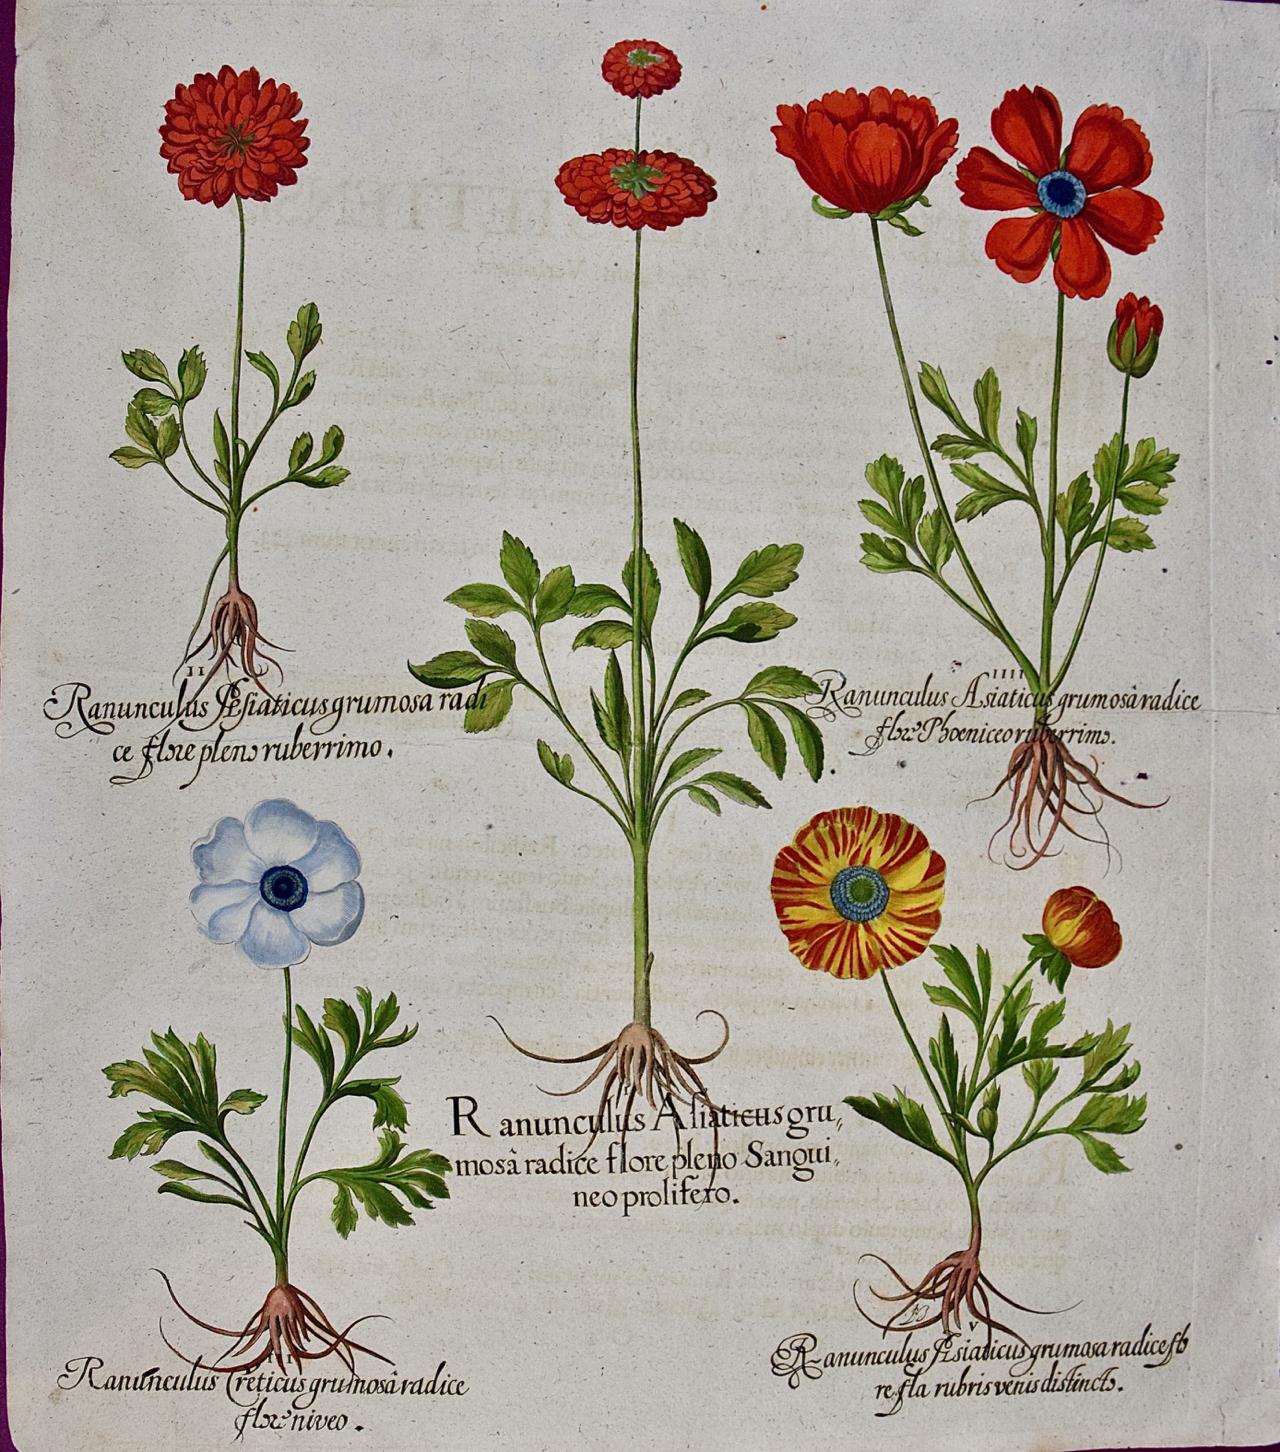 Buttercup Flowers: A Besler 18th Century Hand-colored Botanical Engraving